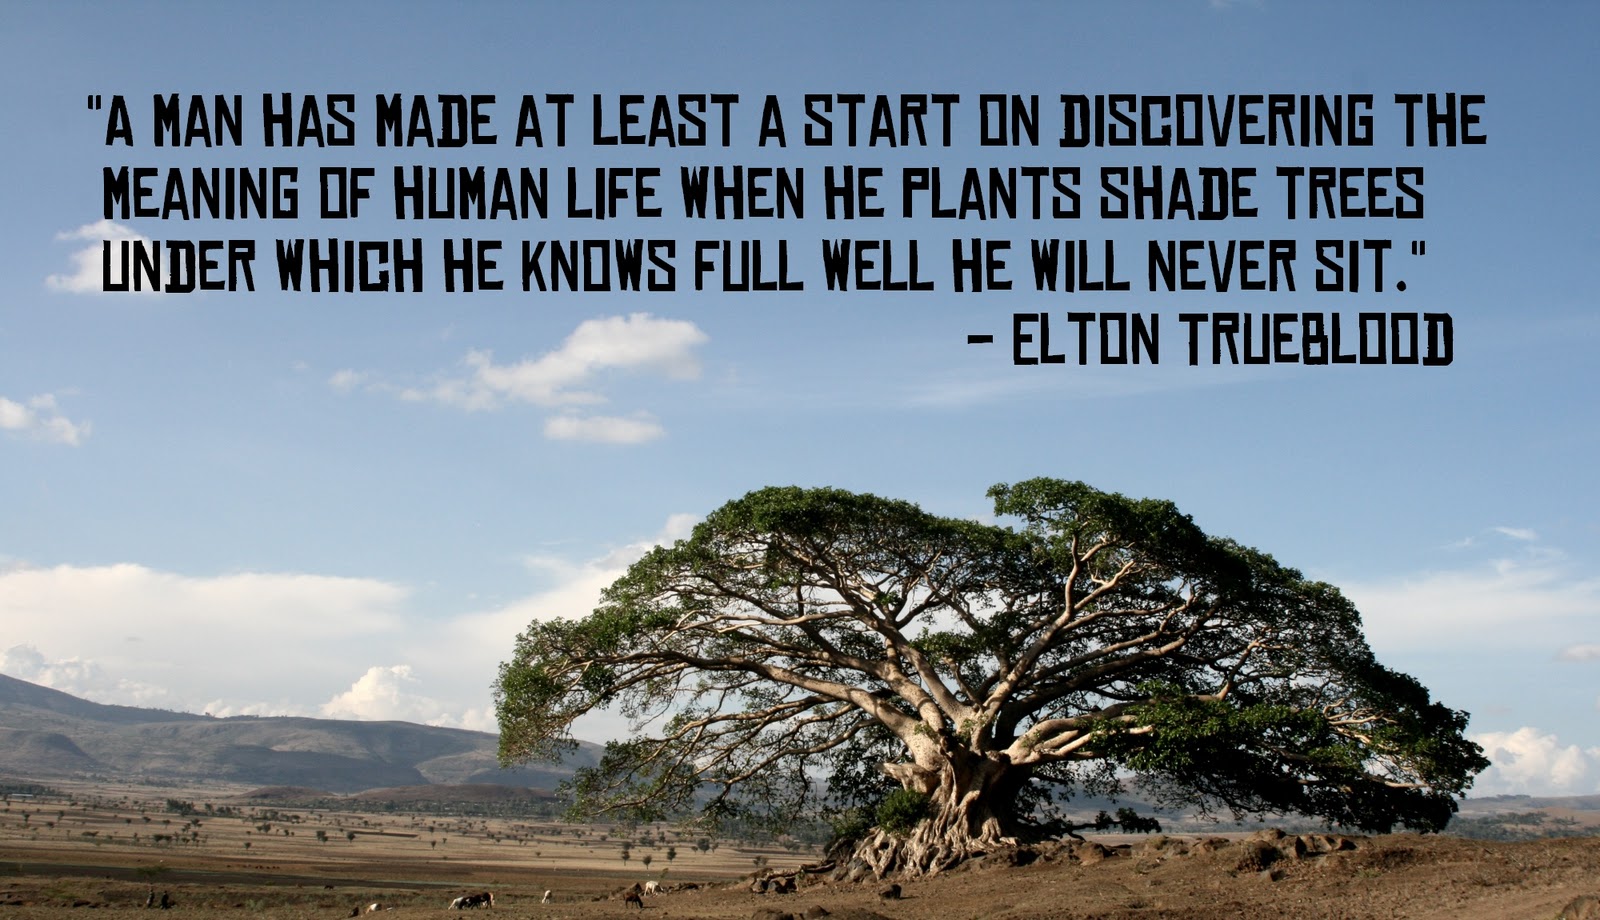 A man has made at least a start on discovering the meaning of human life when he plants shade trees under which he knows full Elton Trueblood